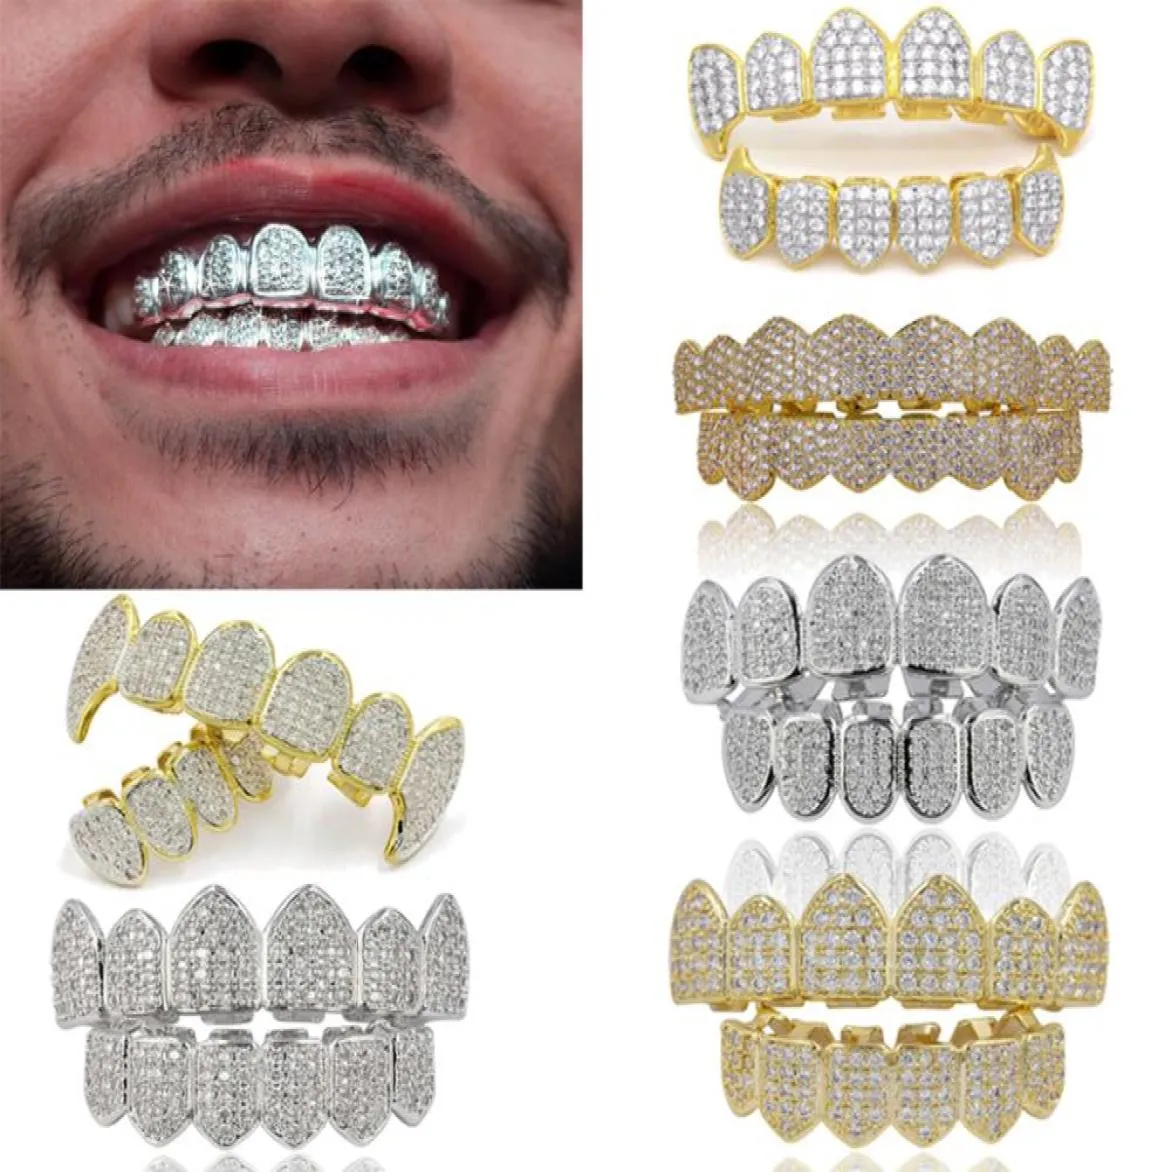 18K Real Gold Punk Hiphop Dental Mouth Grillz Braces Bling Cubic Zircon Rock Vampire Teeth Fang Grills Braces Tooth Cap Rapper Jew2424834